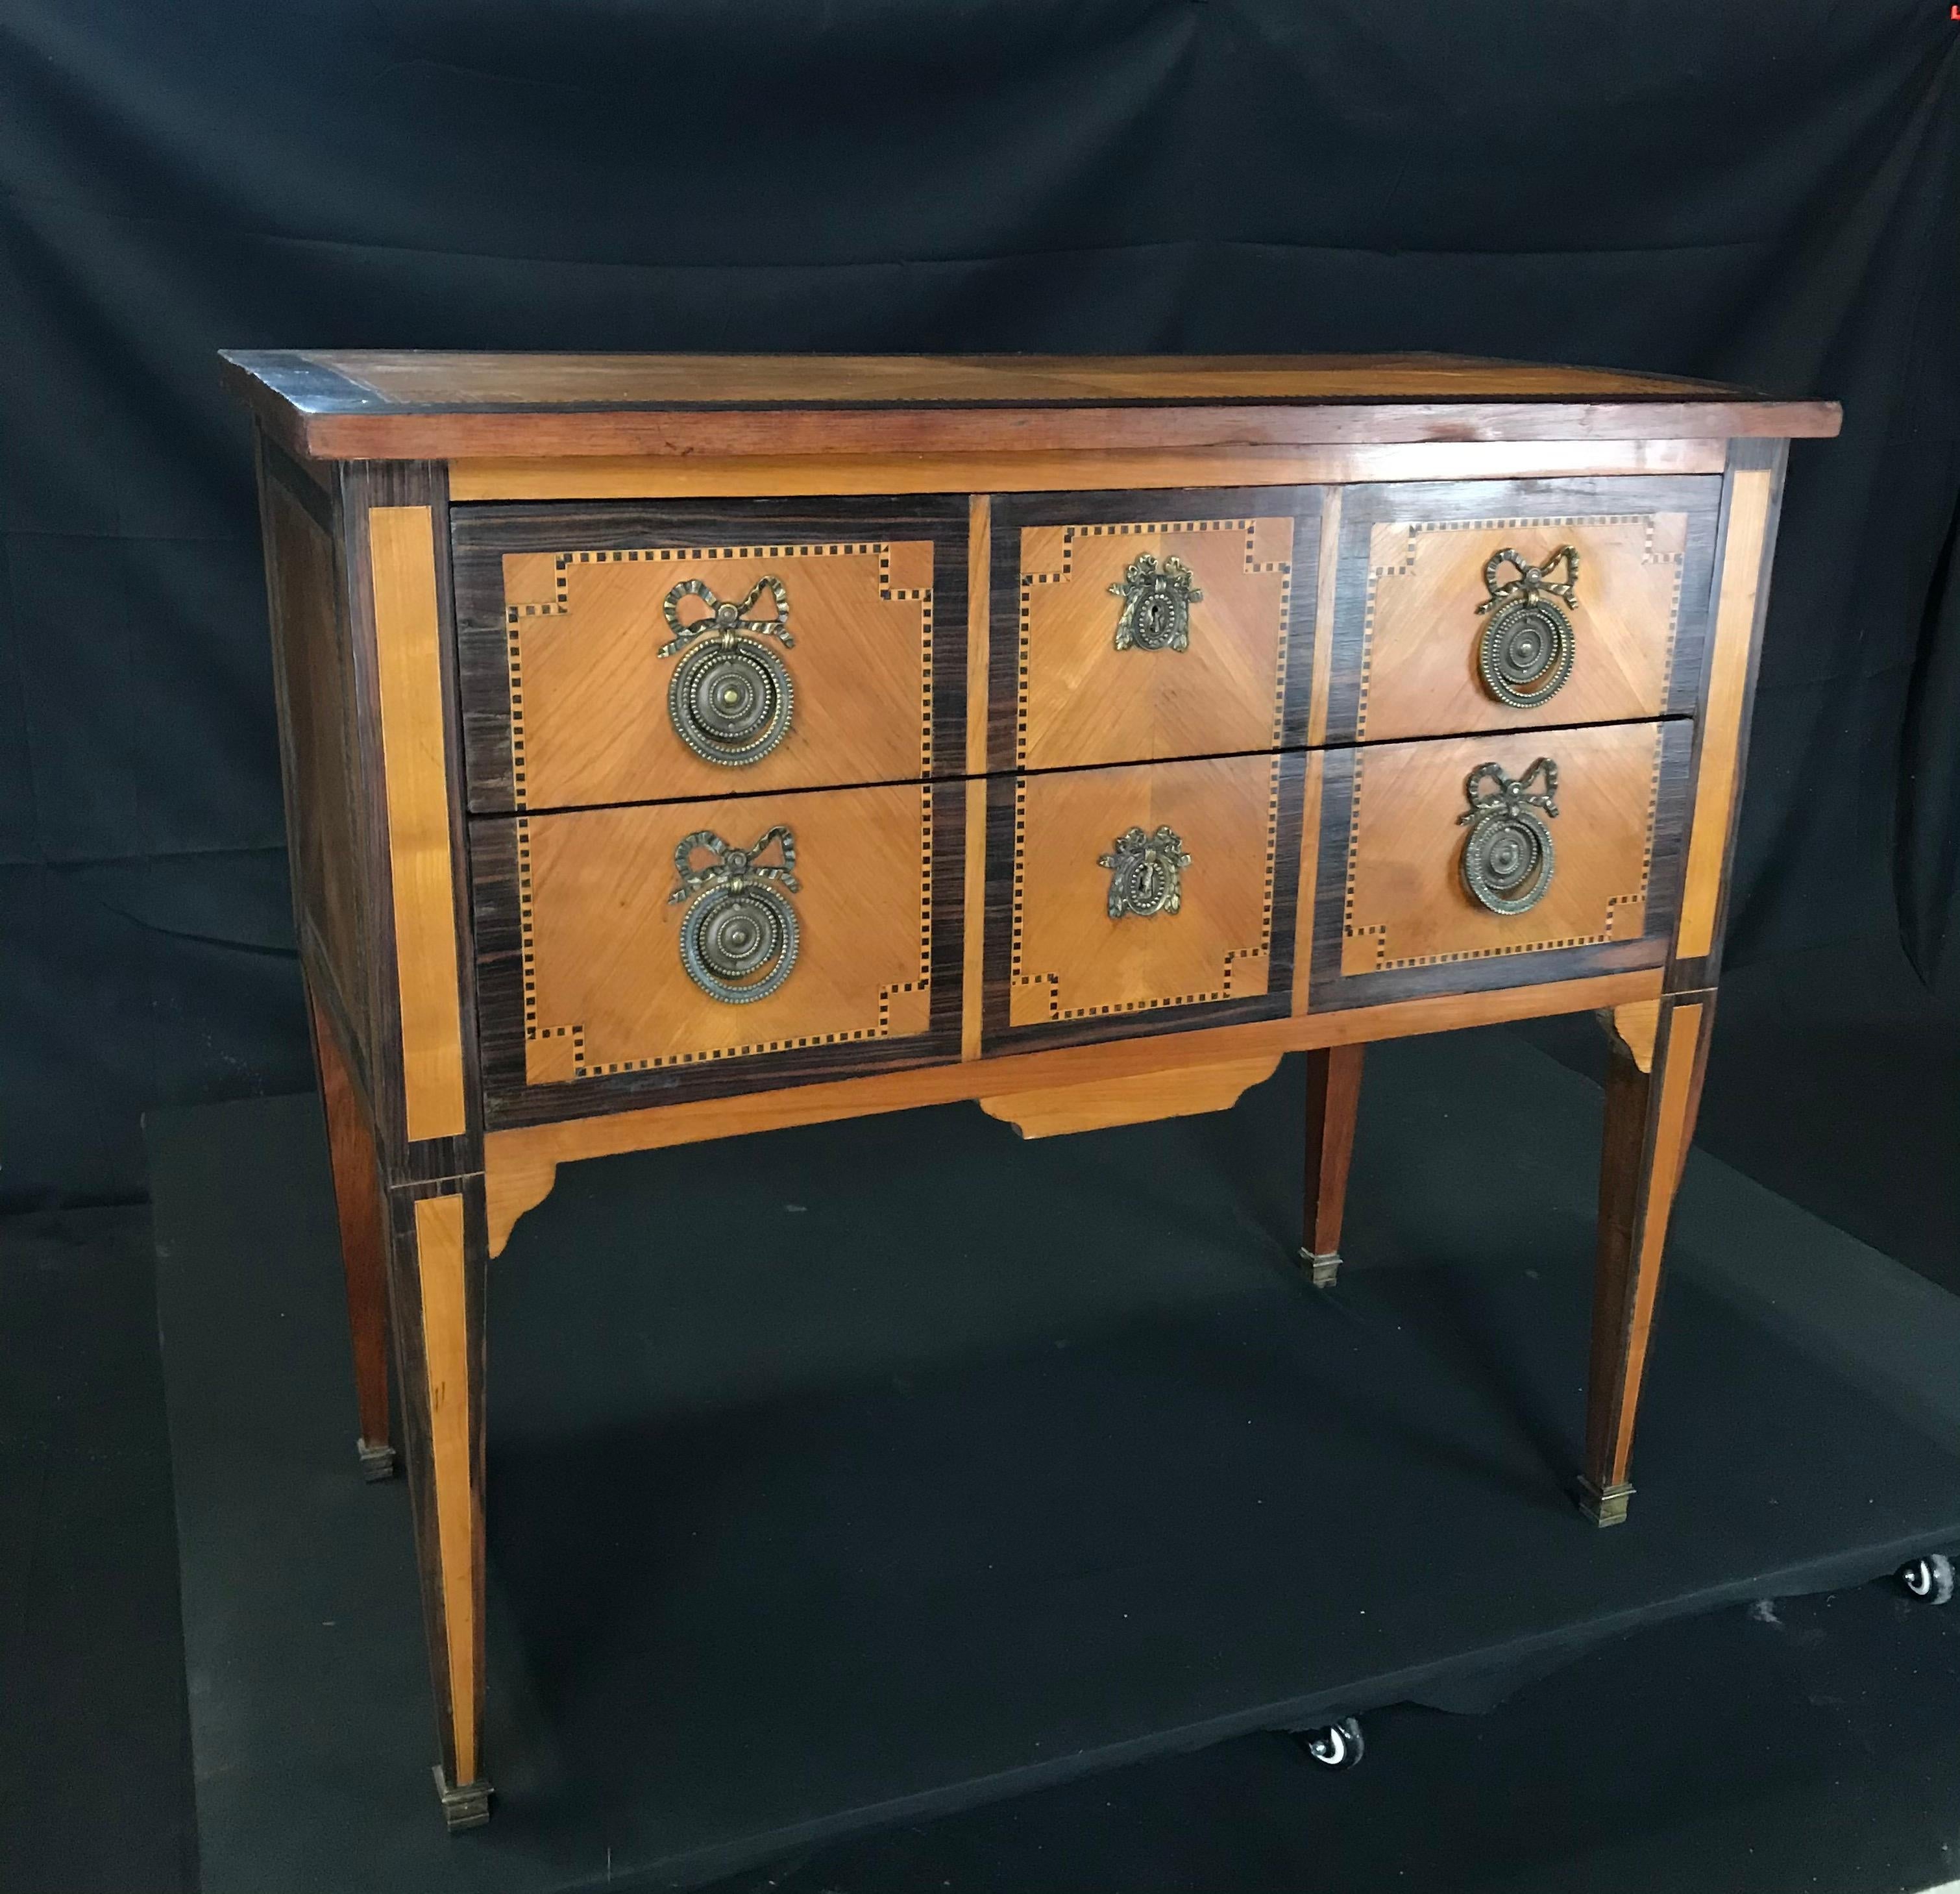 An exquisite inlaid petite commode on stand having an intricate marquetry top and body above two locking drawers with geometric inlay and bronze pulls and escutcheons on tapered legs ending in bronze ferrules. 

#5811




